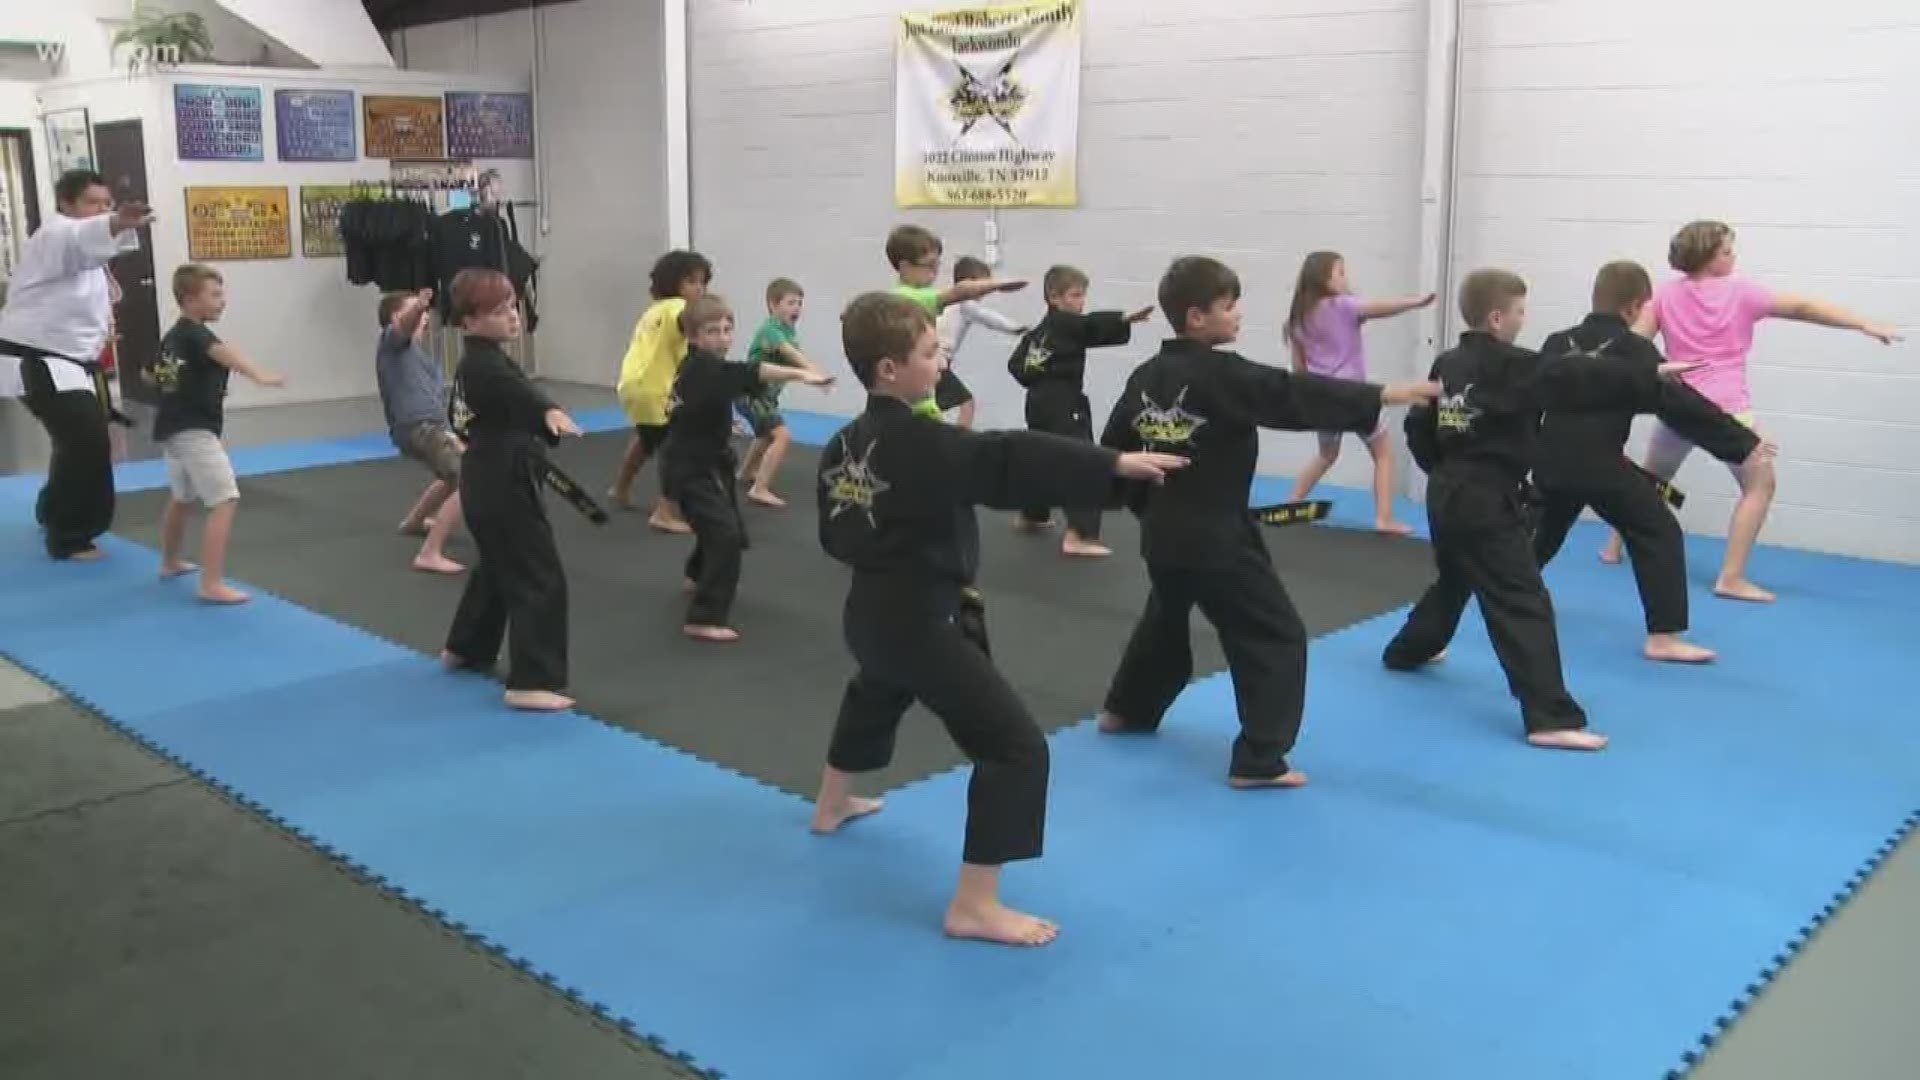 Children learn martial art skills and confidence